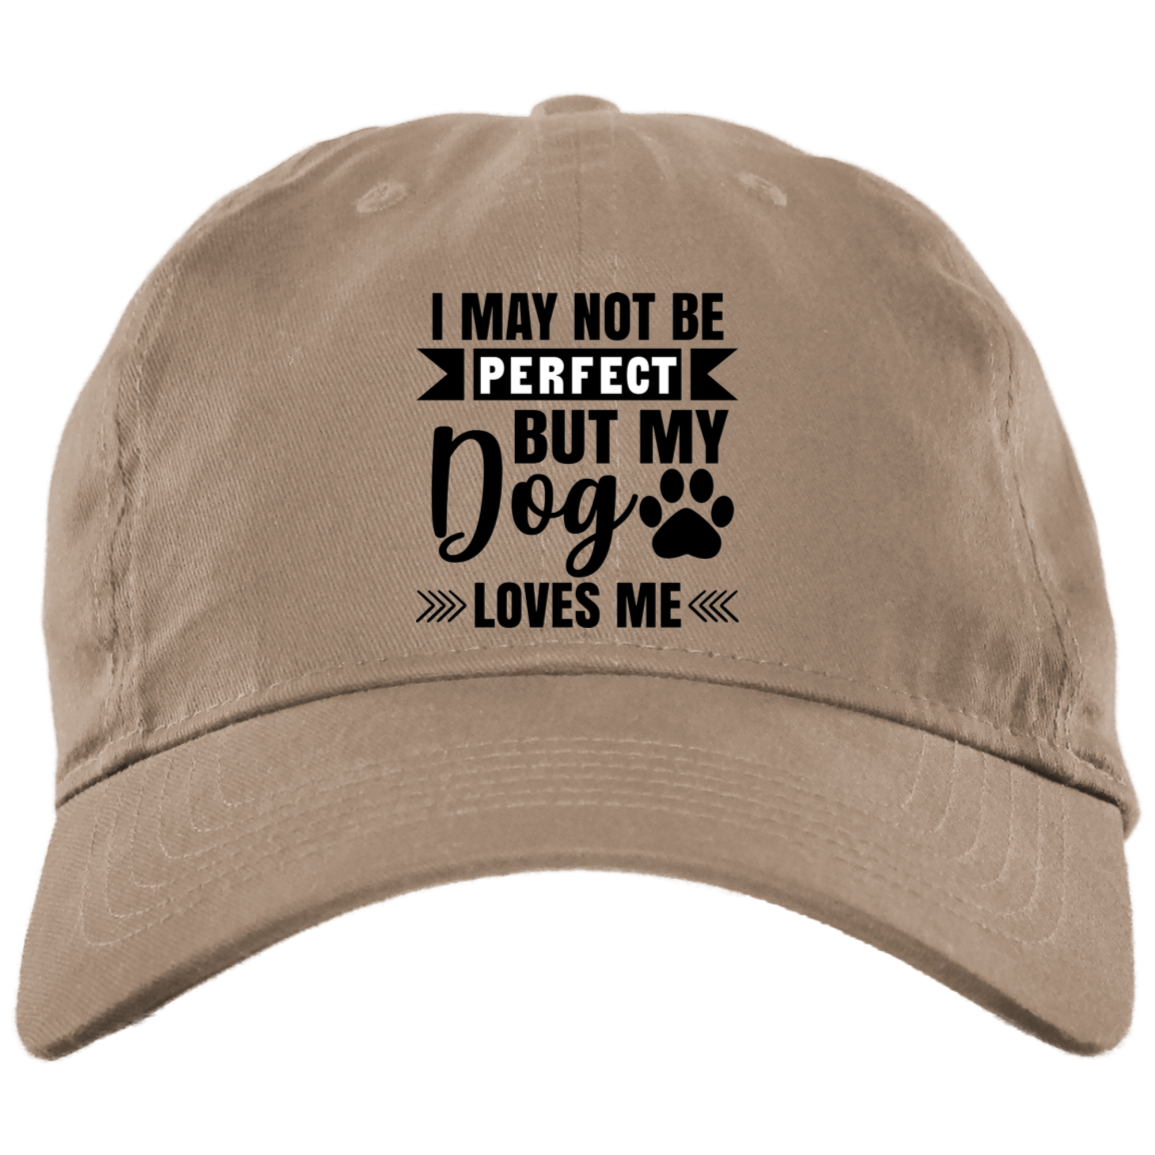 I May Not Be Perfect But My Dogs Love Me Embroidered Brushed Twill Unstructured Dad Cap